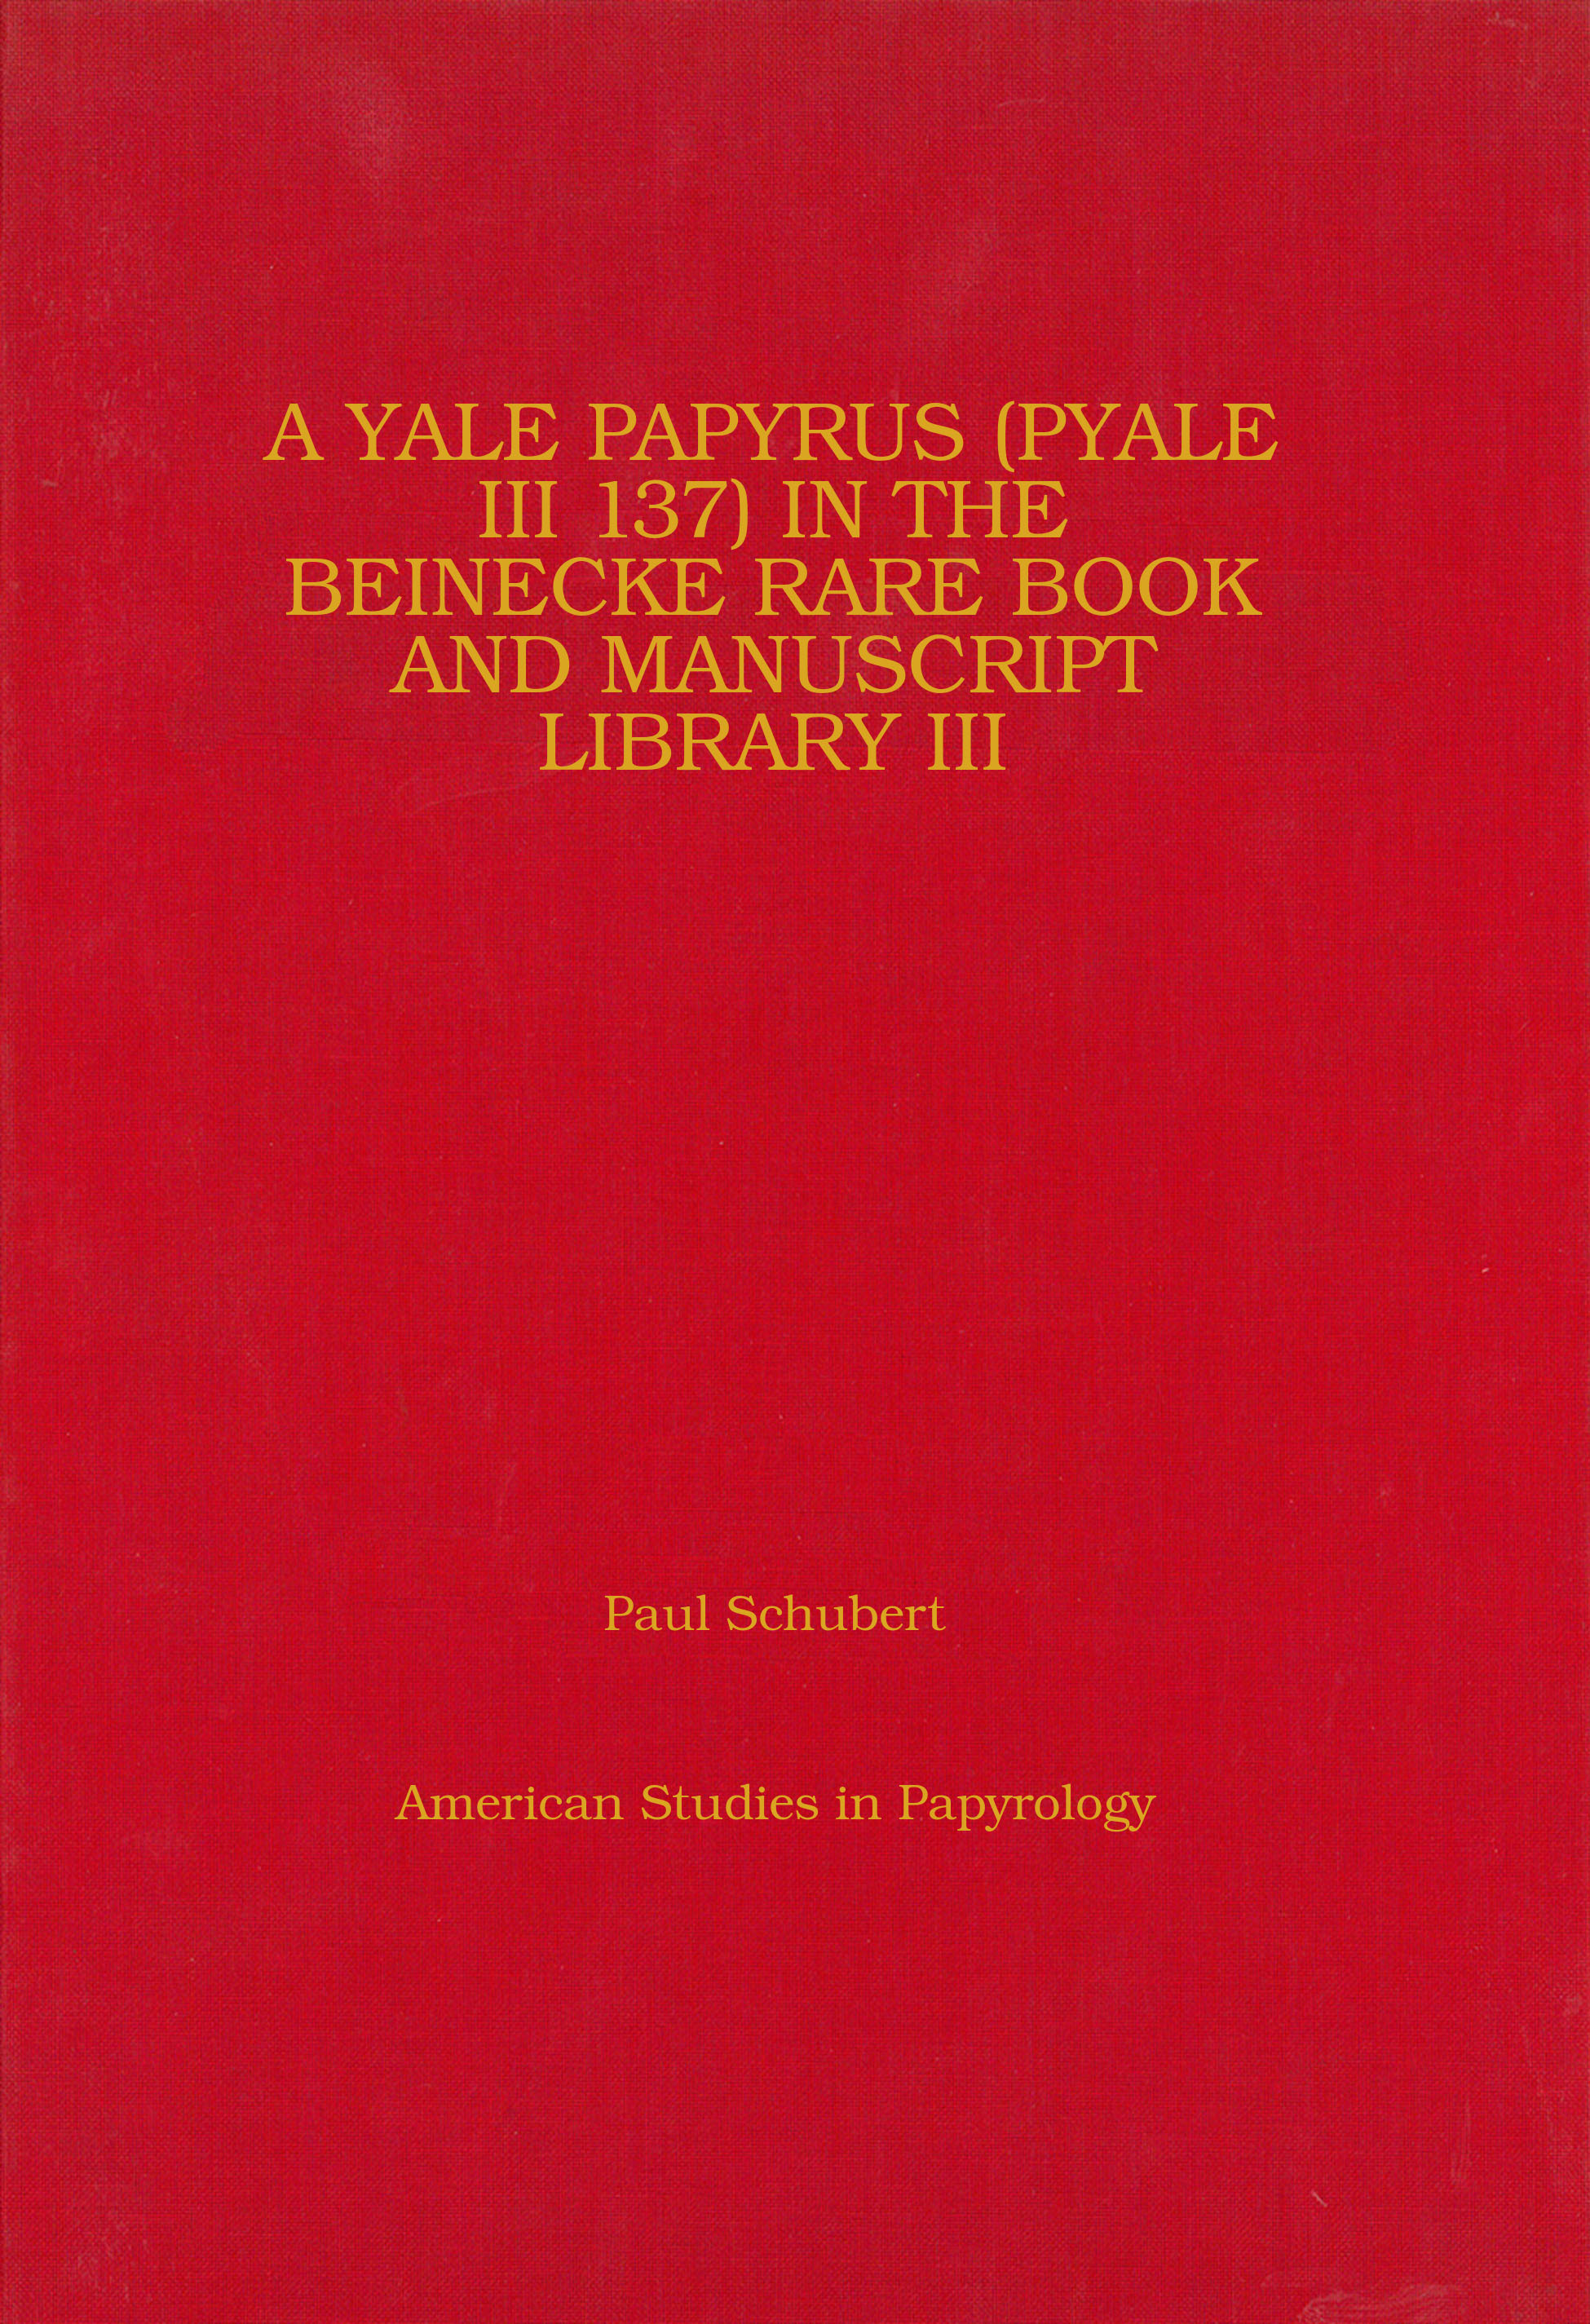 A Yale Papyrus (PYale III 137) in the Beinecke Rare Book and